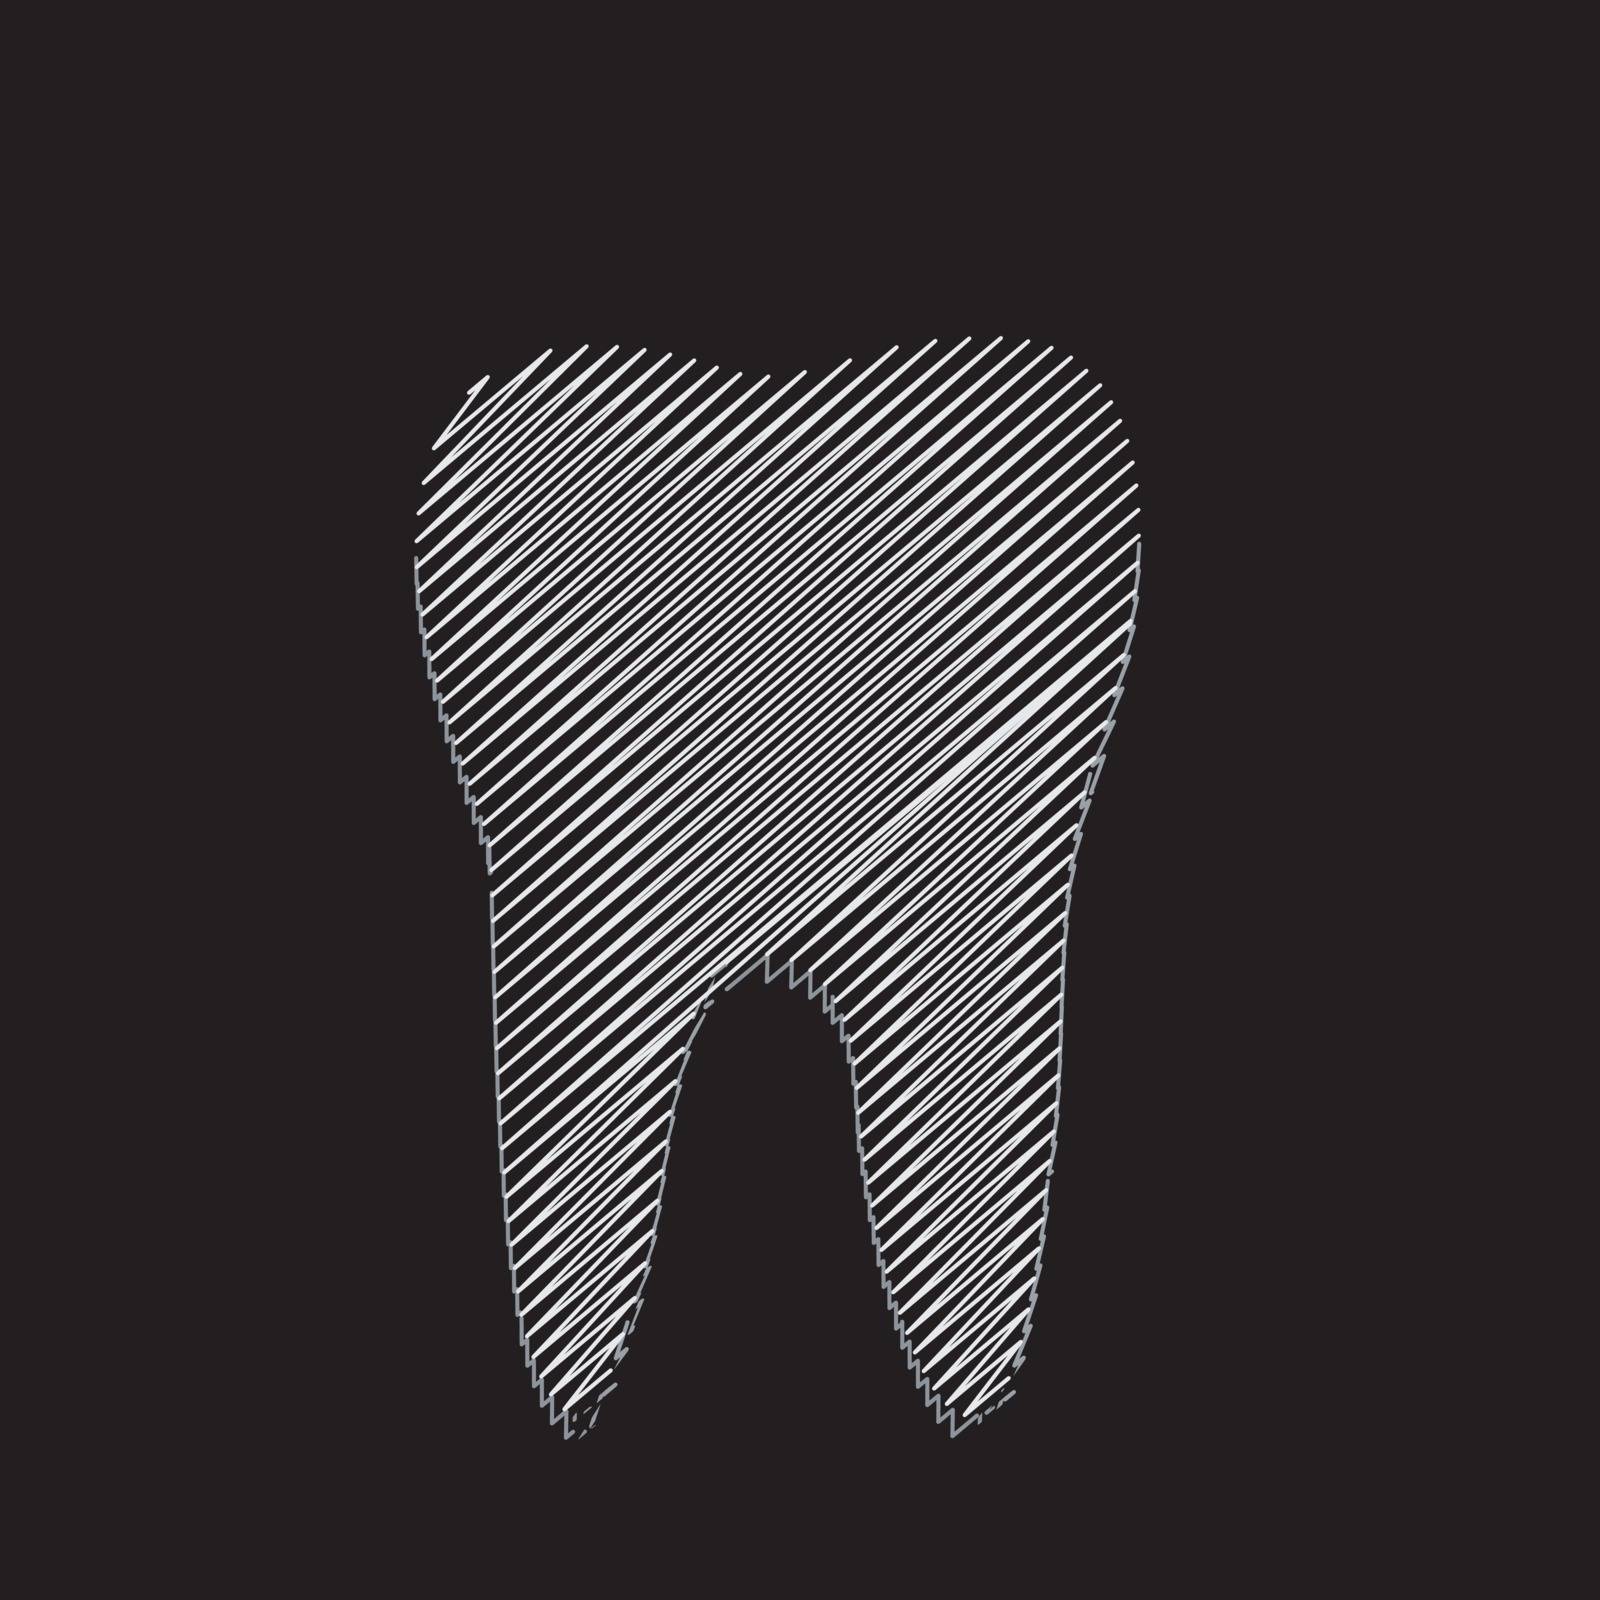 Tooth graphic for dentist by shawlinmohd